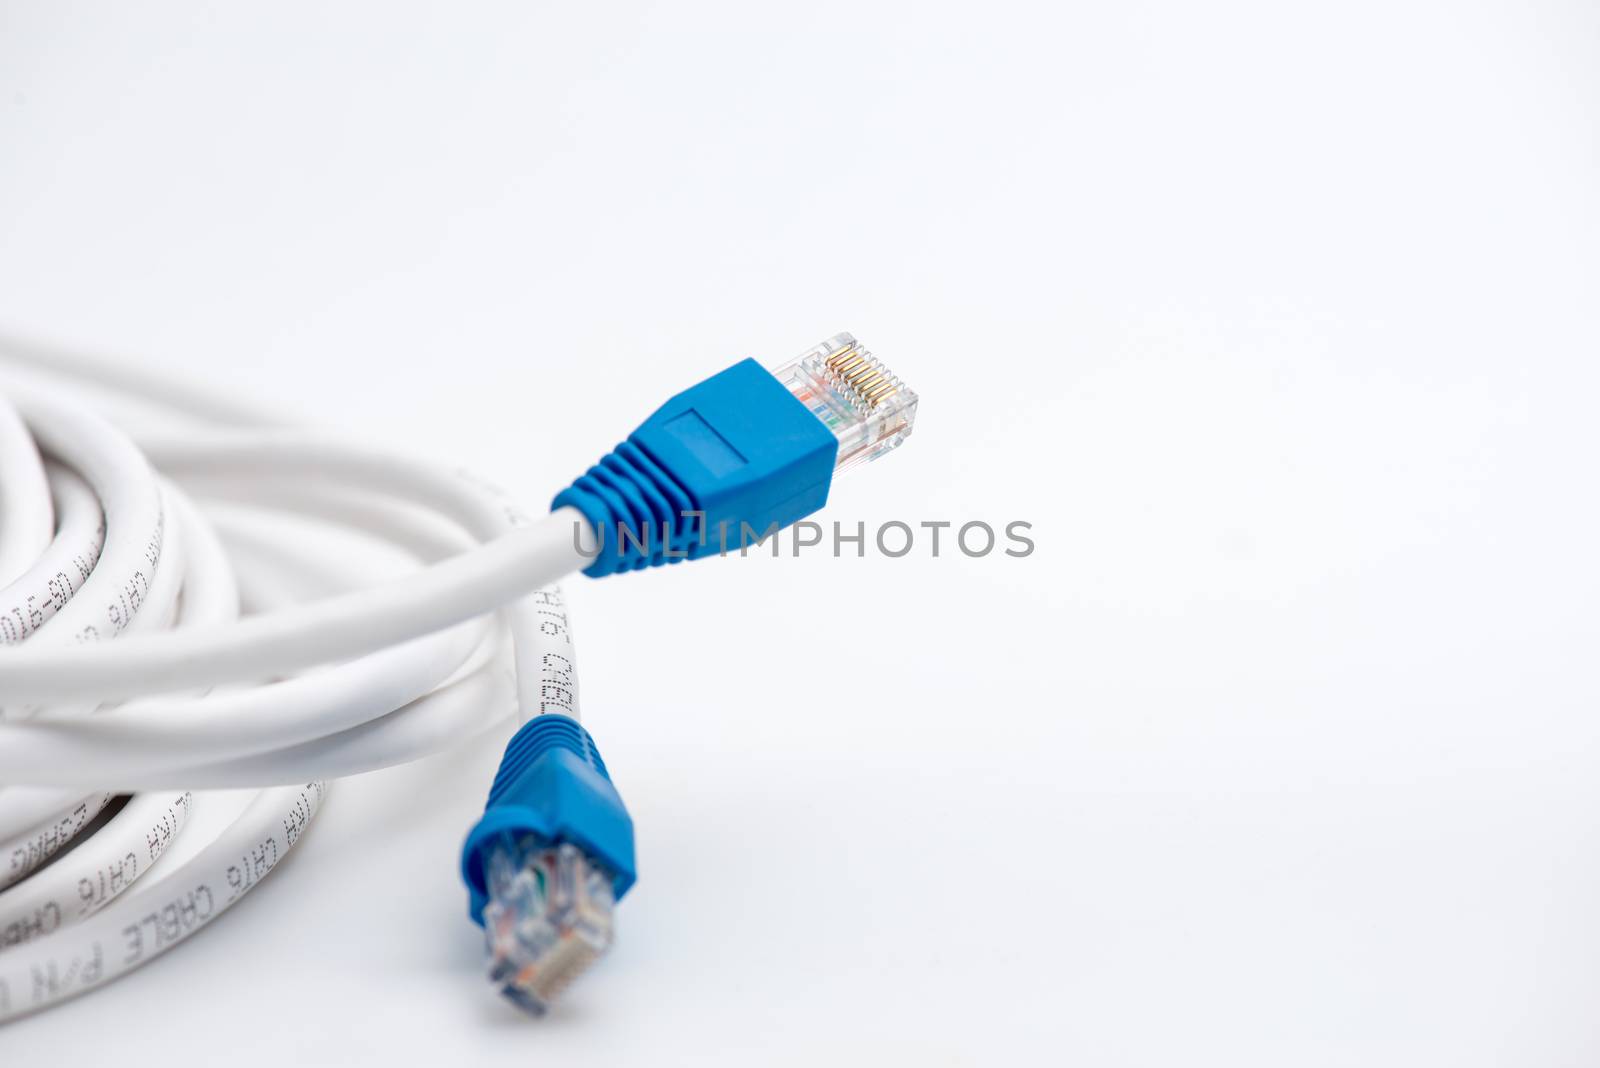 network cable on white background